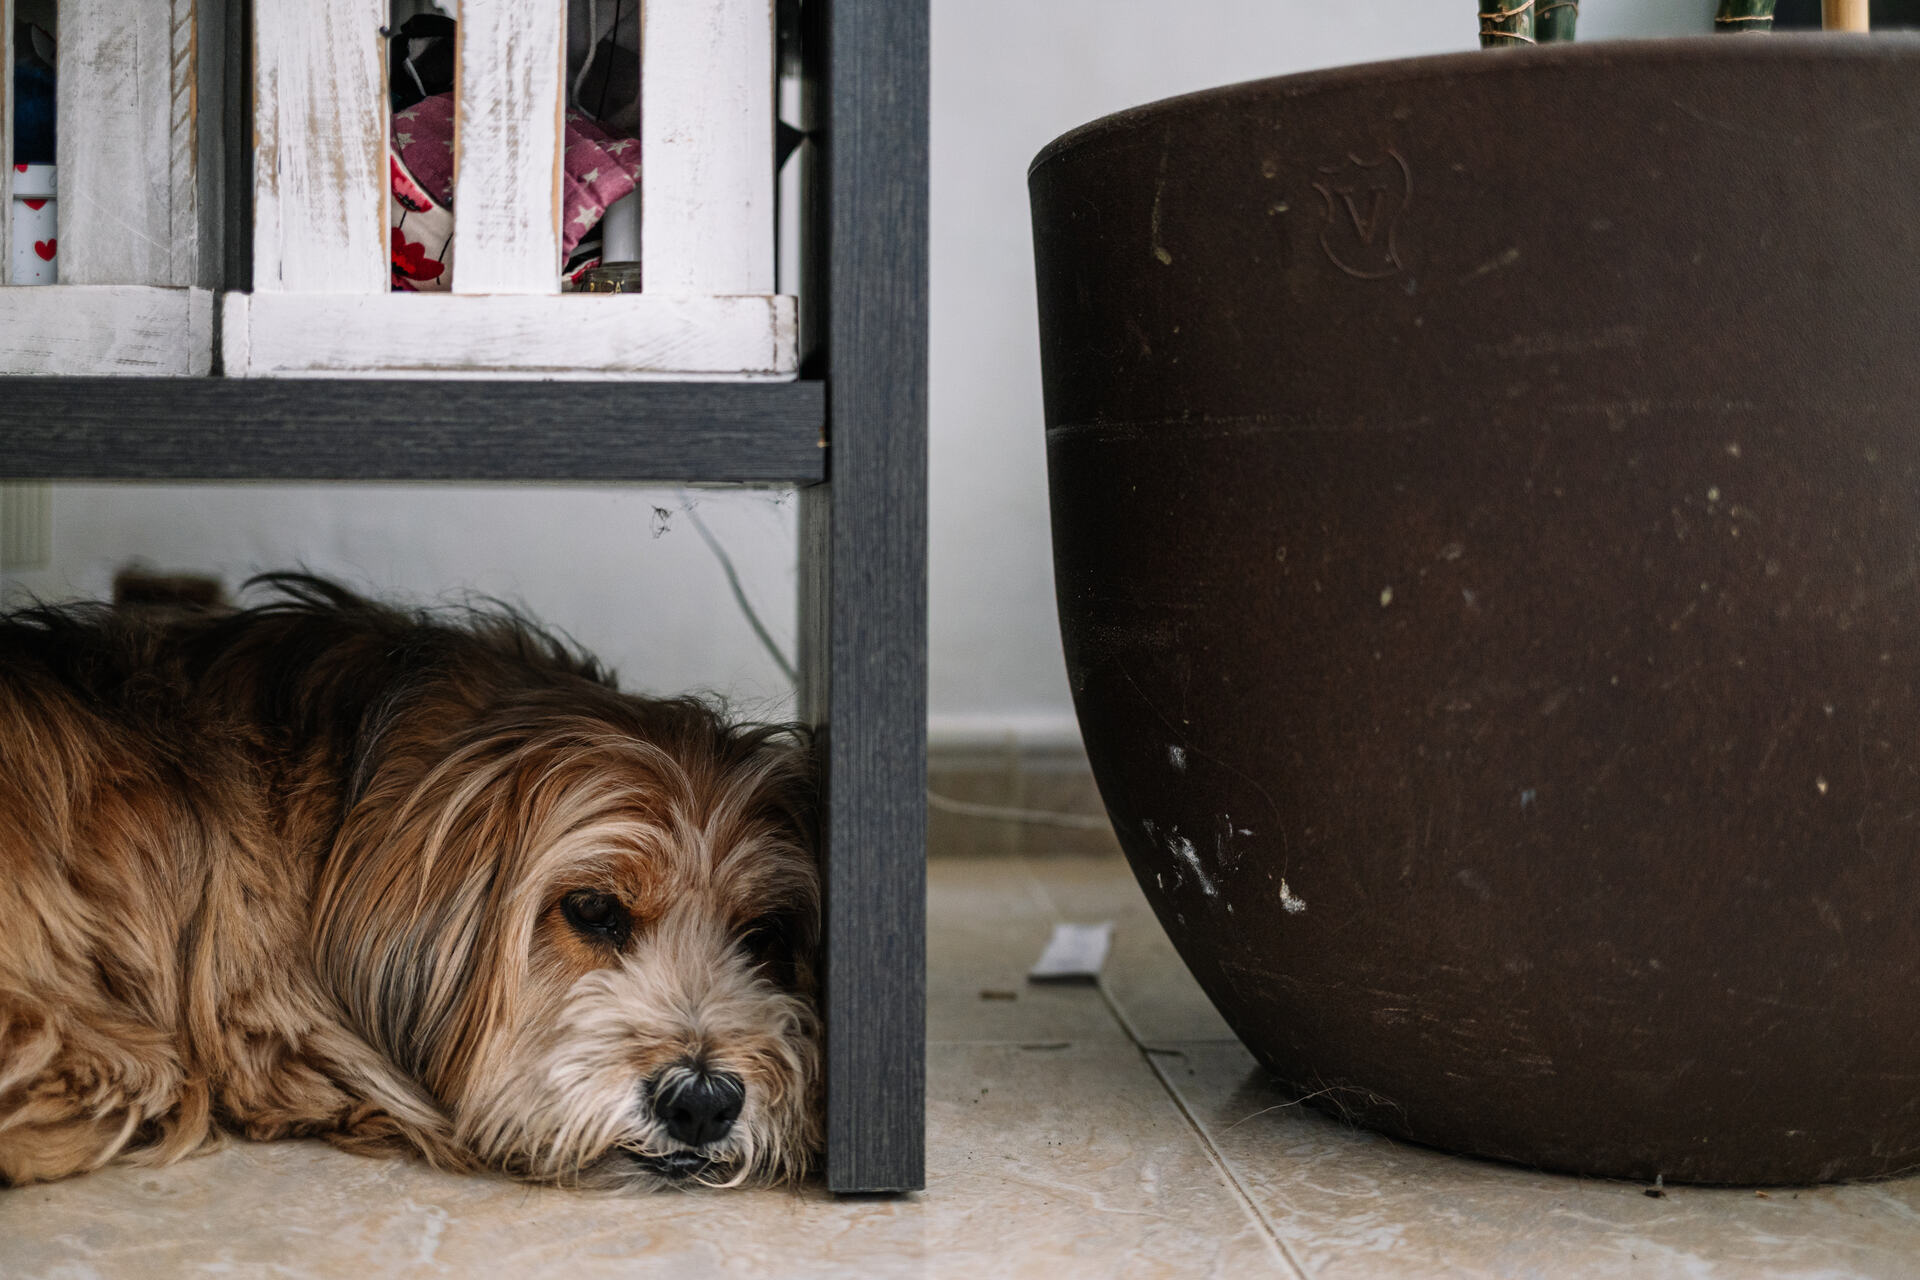 A frightened dog hiding under a table